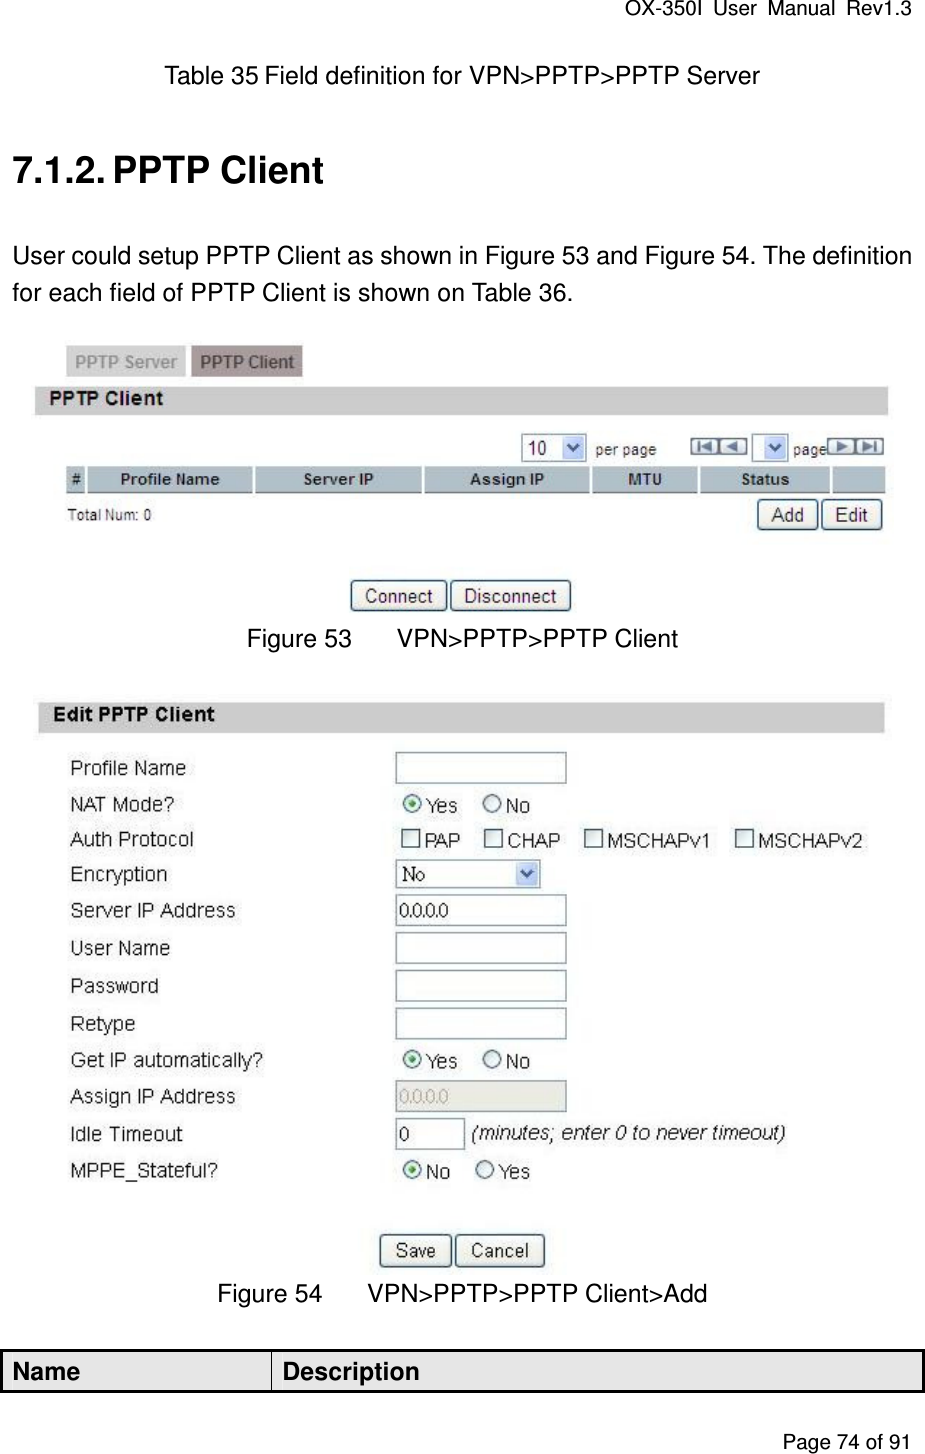 OX-350I  User  Manual  Rev1.3 Page 74 of 91 Table 35 Field definition for VPN&gt;PPTP&gt;PPTP Server 7.1.2. PPTP Client User could setup PPTP Client as shown in Figure 53 and Figure 54. The definition for each field of PPTP Client is shown on Table 36.  Figure 53  VPN&gt;PPTP&gt;PPTP Client  Figure 54  VPN&gt;PPTP&gt;PPTP Client&gt;Add Name  Description 